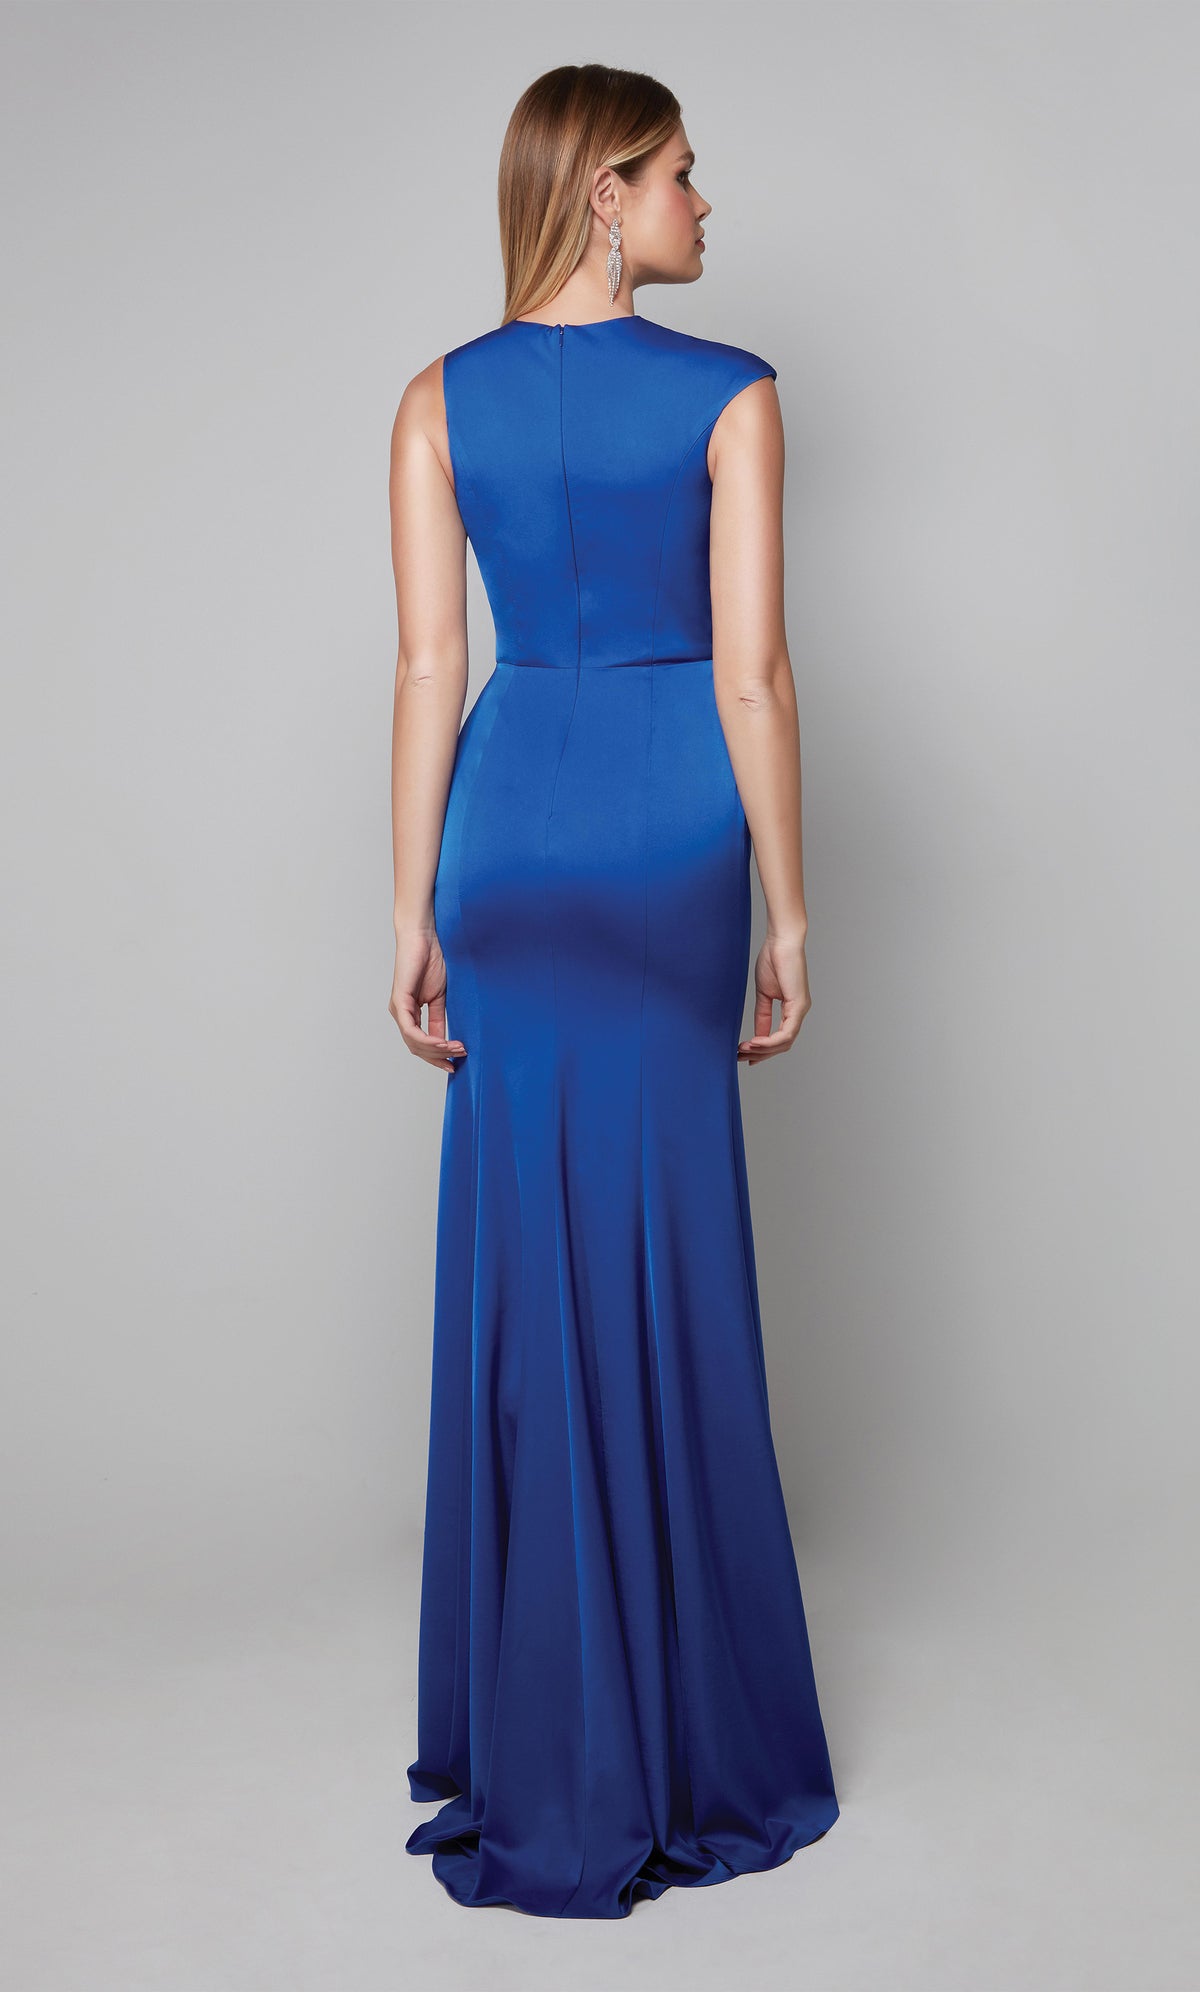 Simple mother of the bride dress with a close back in royal blue.